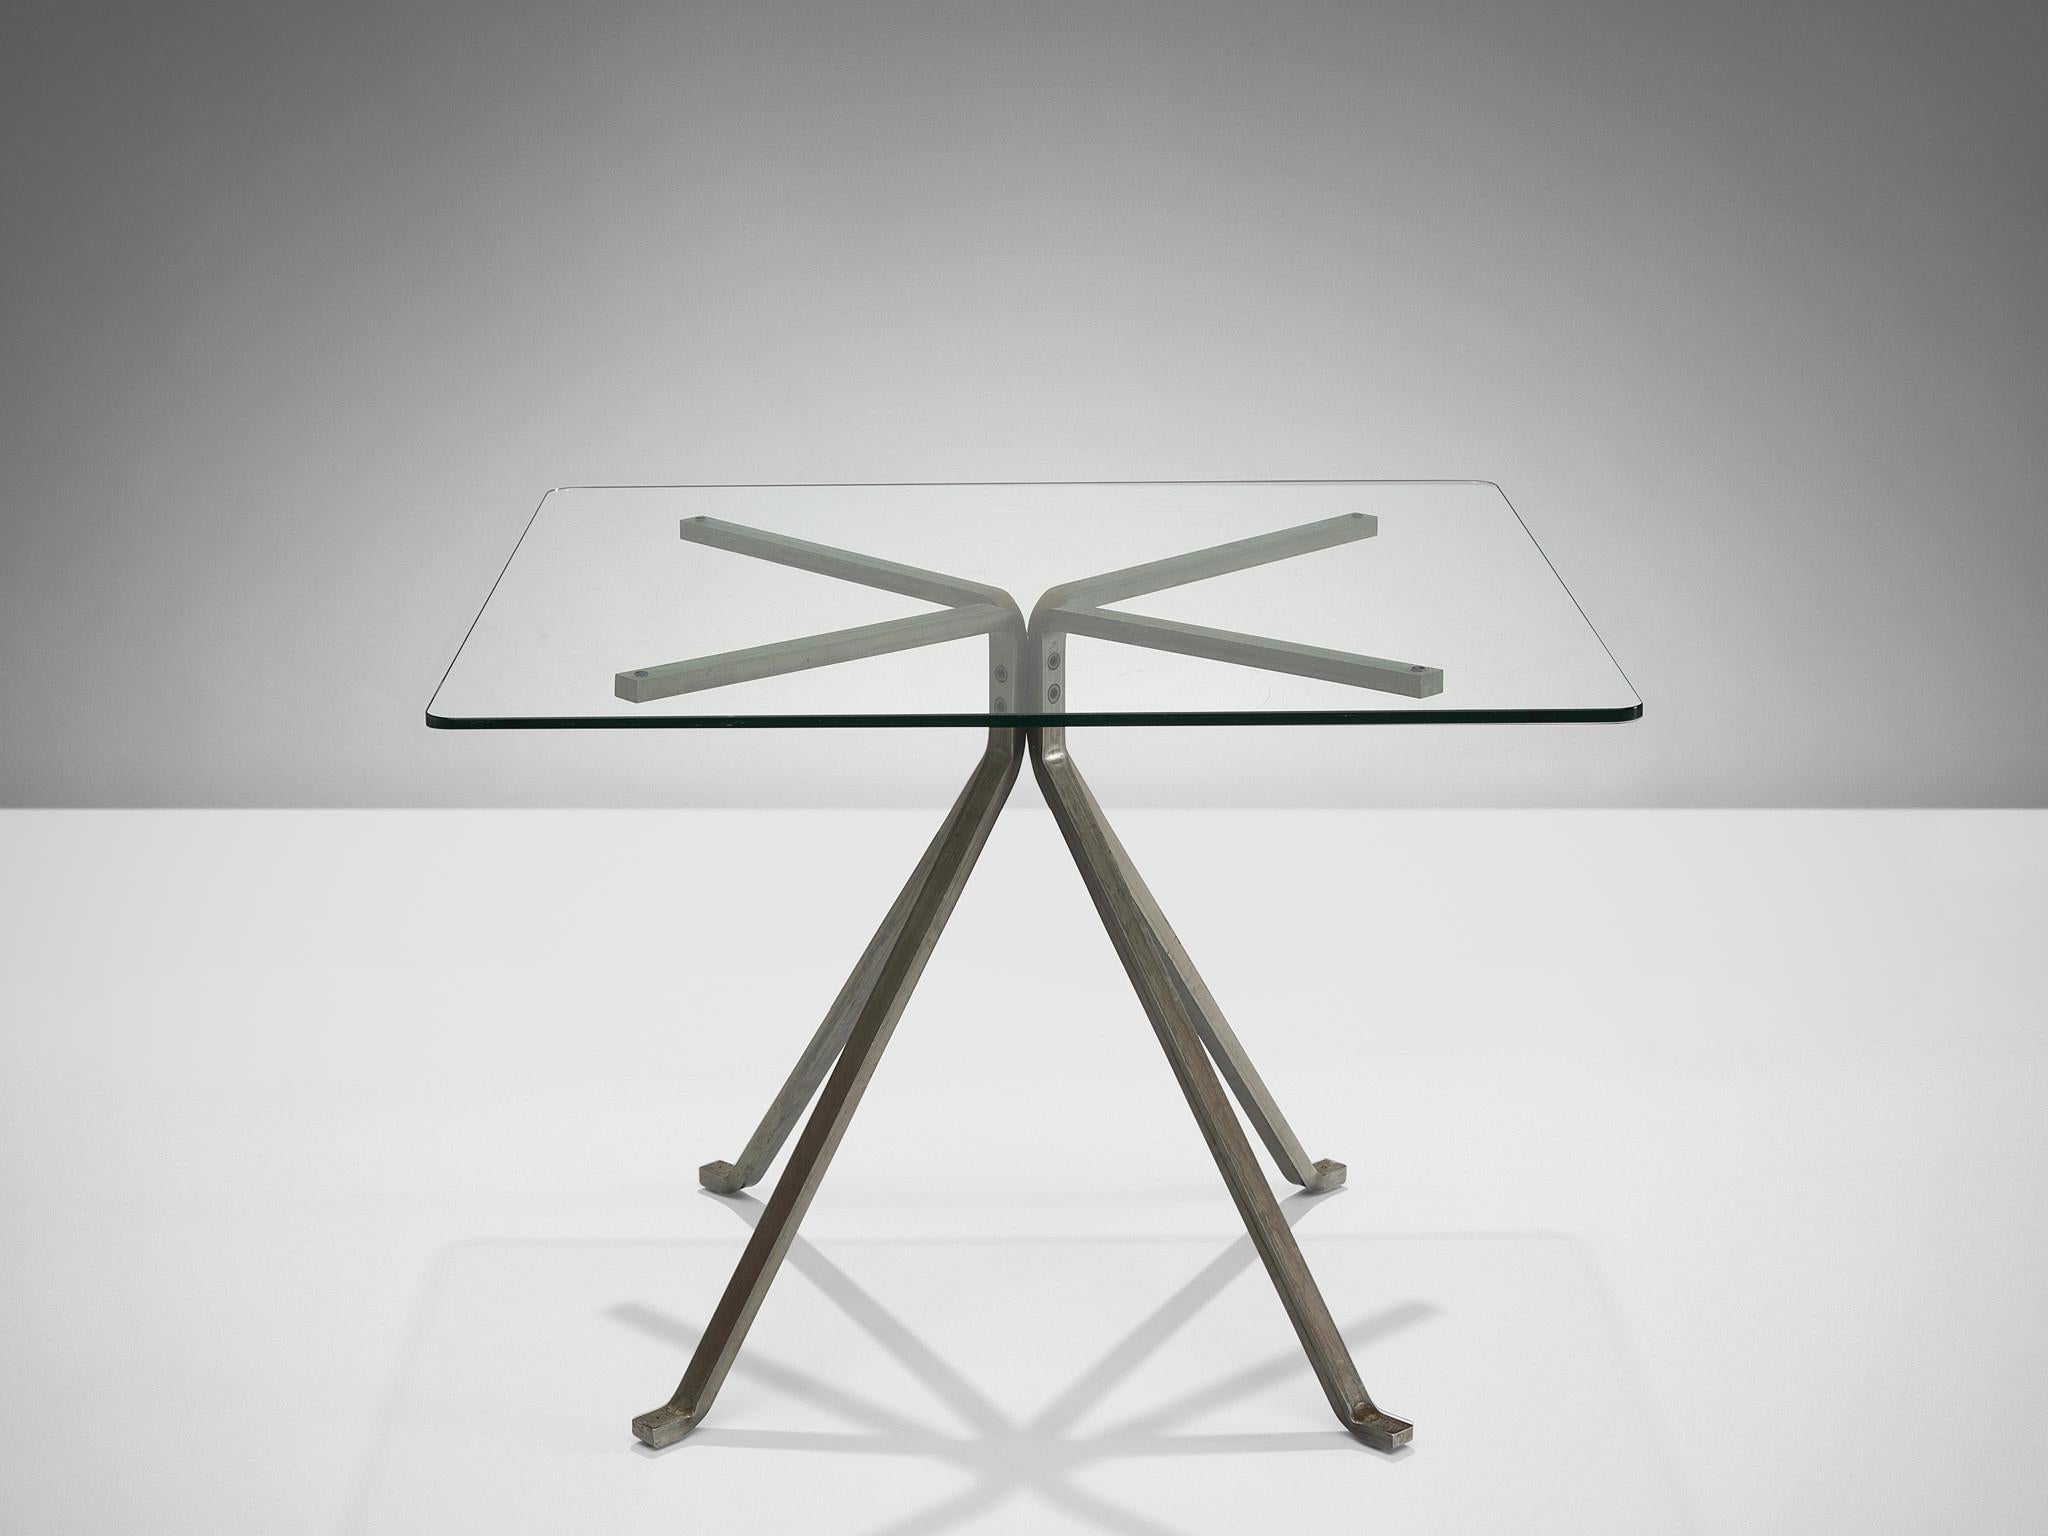 Enzo Mari for Driade, table 'Cugino', glass, brushed steel, Italy, 1973.

A pure and understated design by Enzo Mari for Driade. This table features a clear construction. The base consists of four tapered legs executed in black anthracite steel that